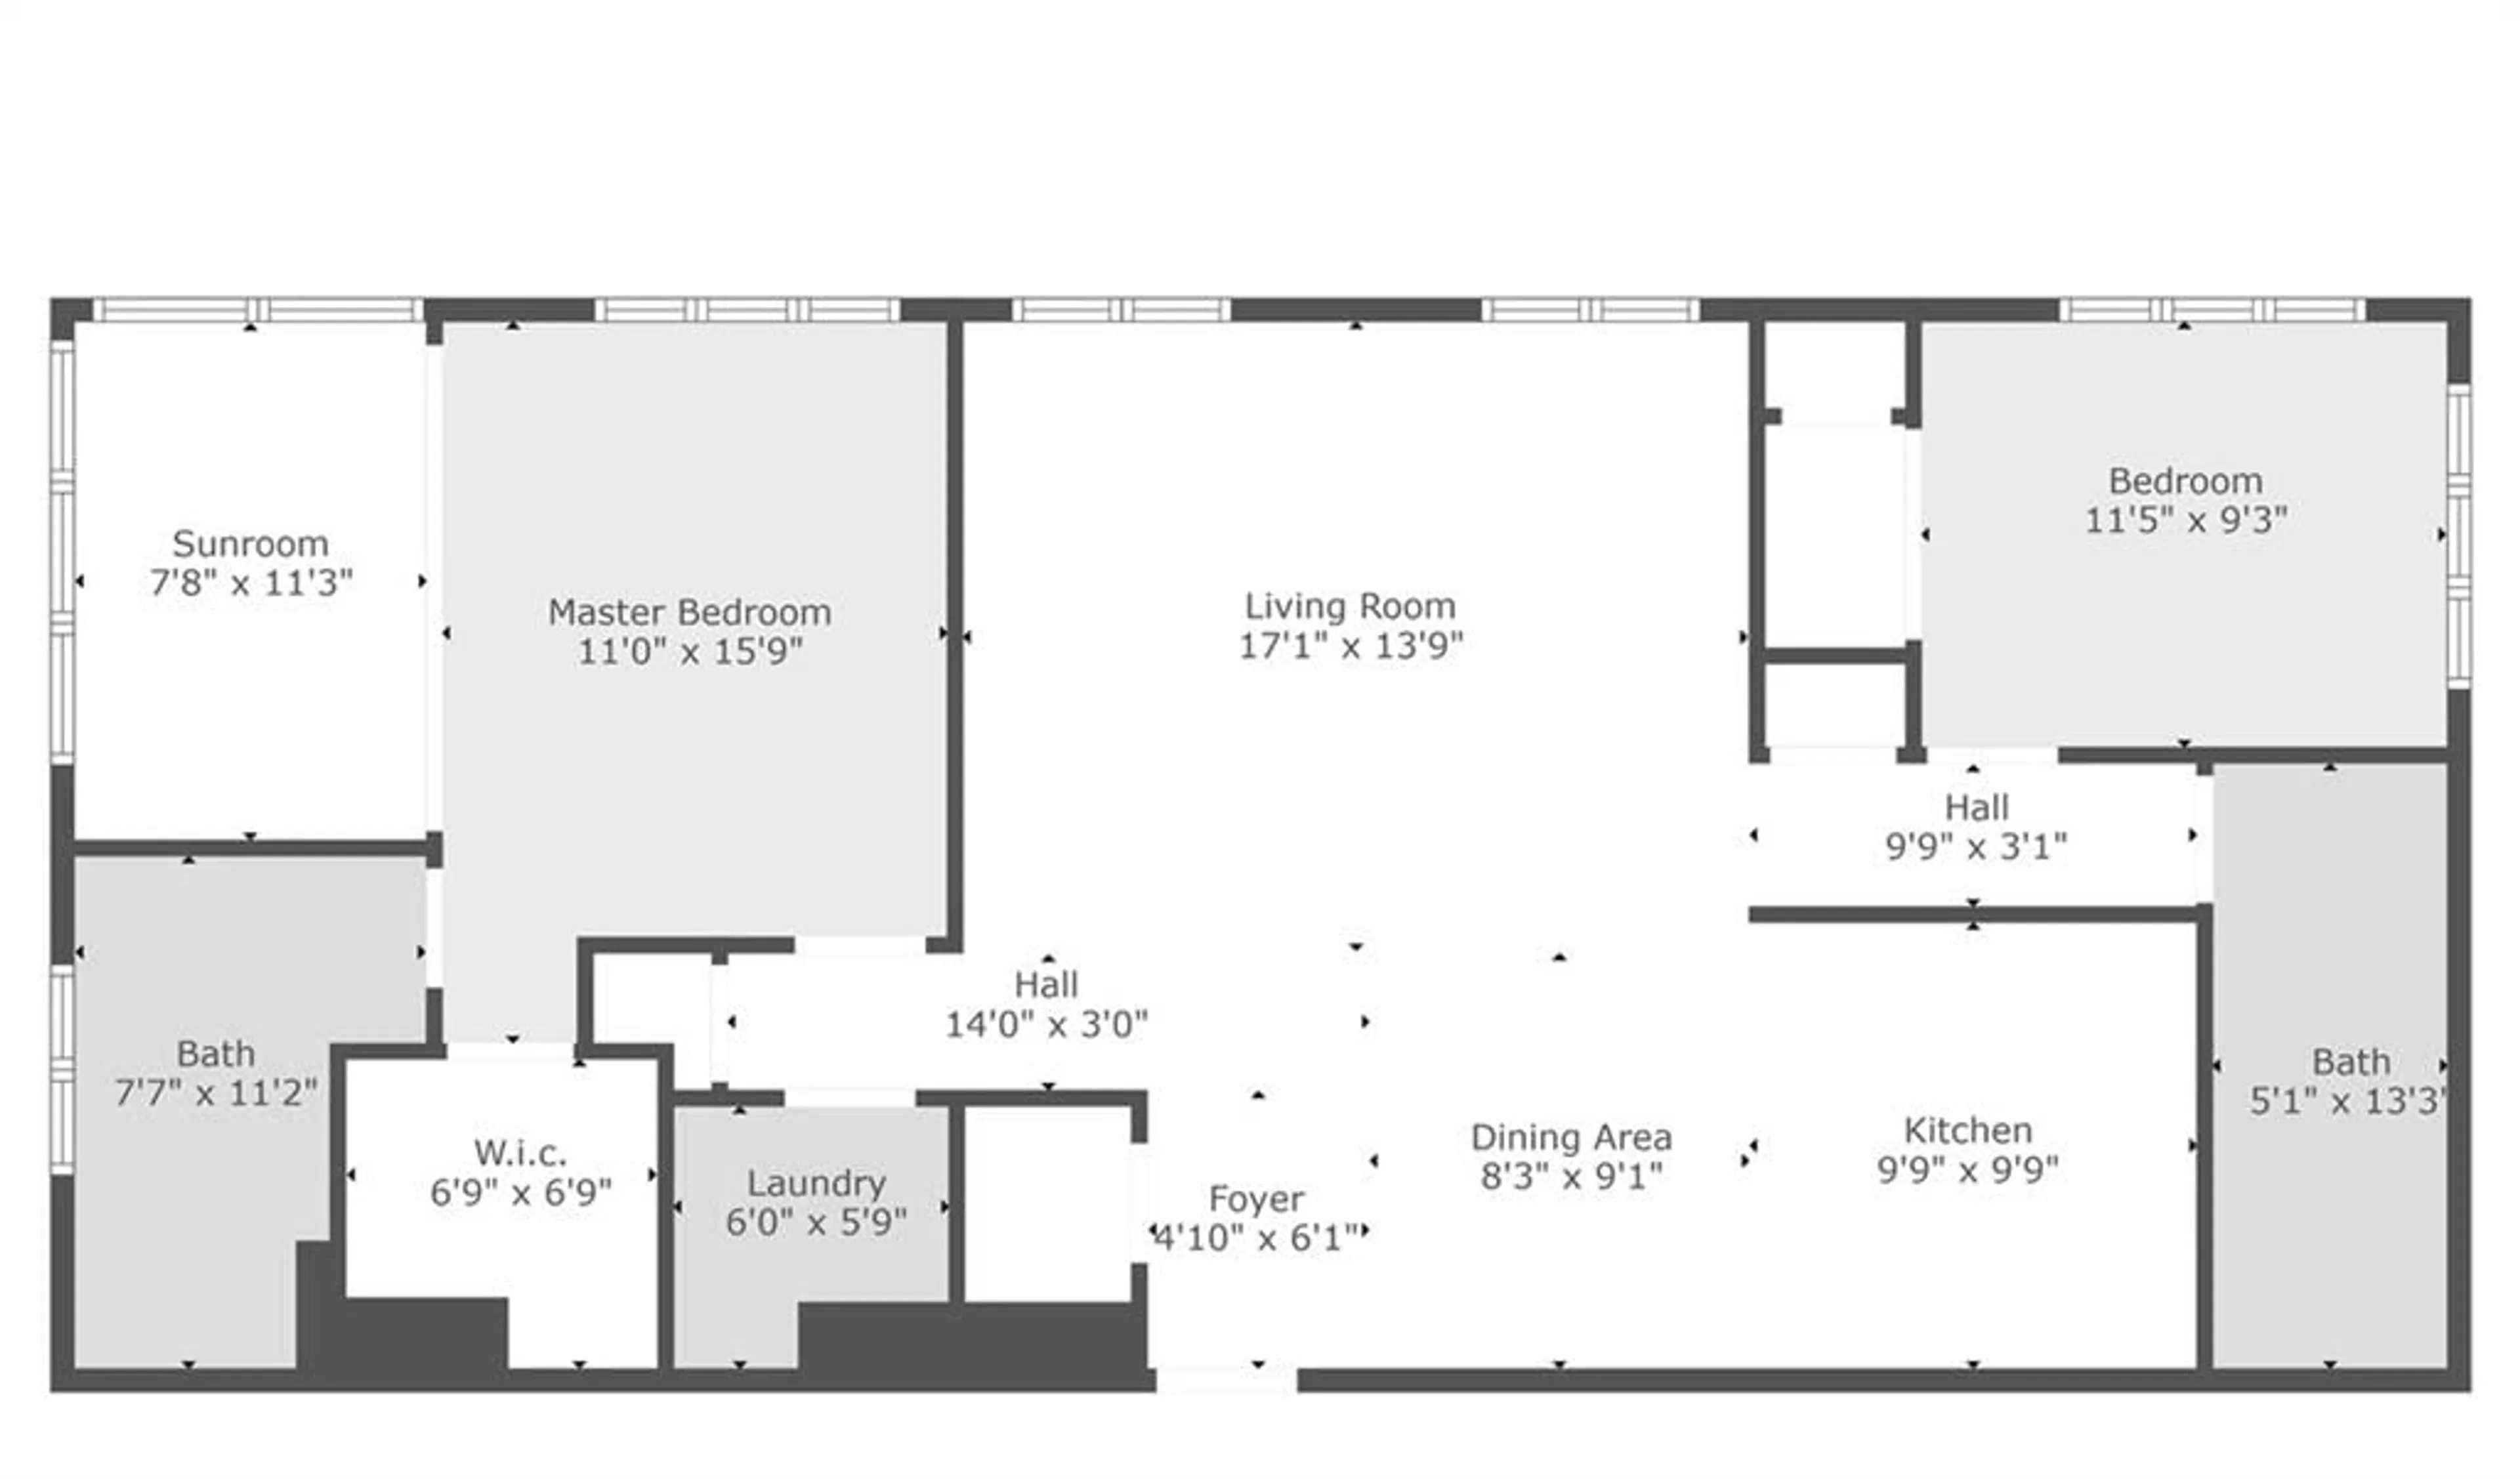 Floor plan for 500 Mapleview Dr #300, Barrie Ontario L4N 6C3